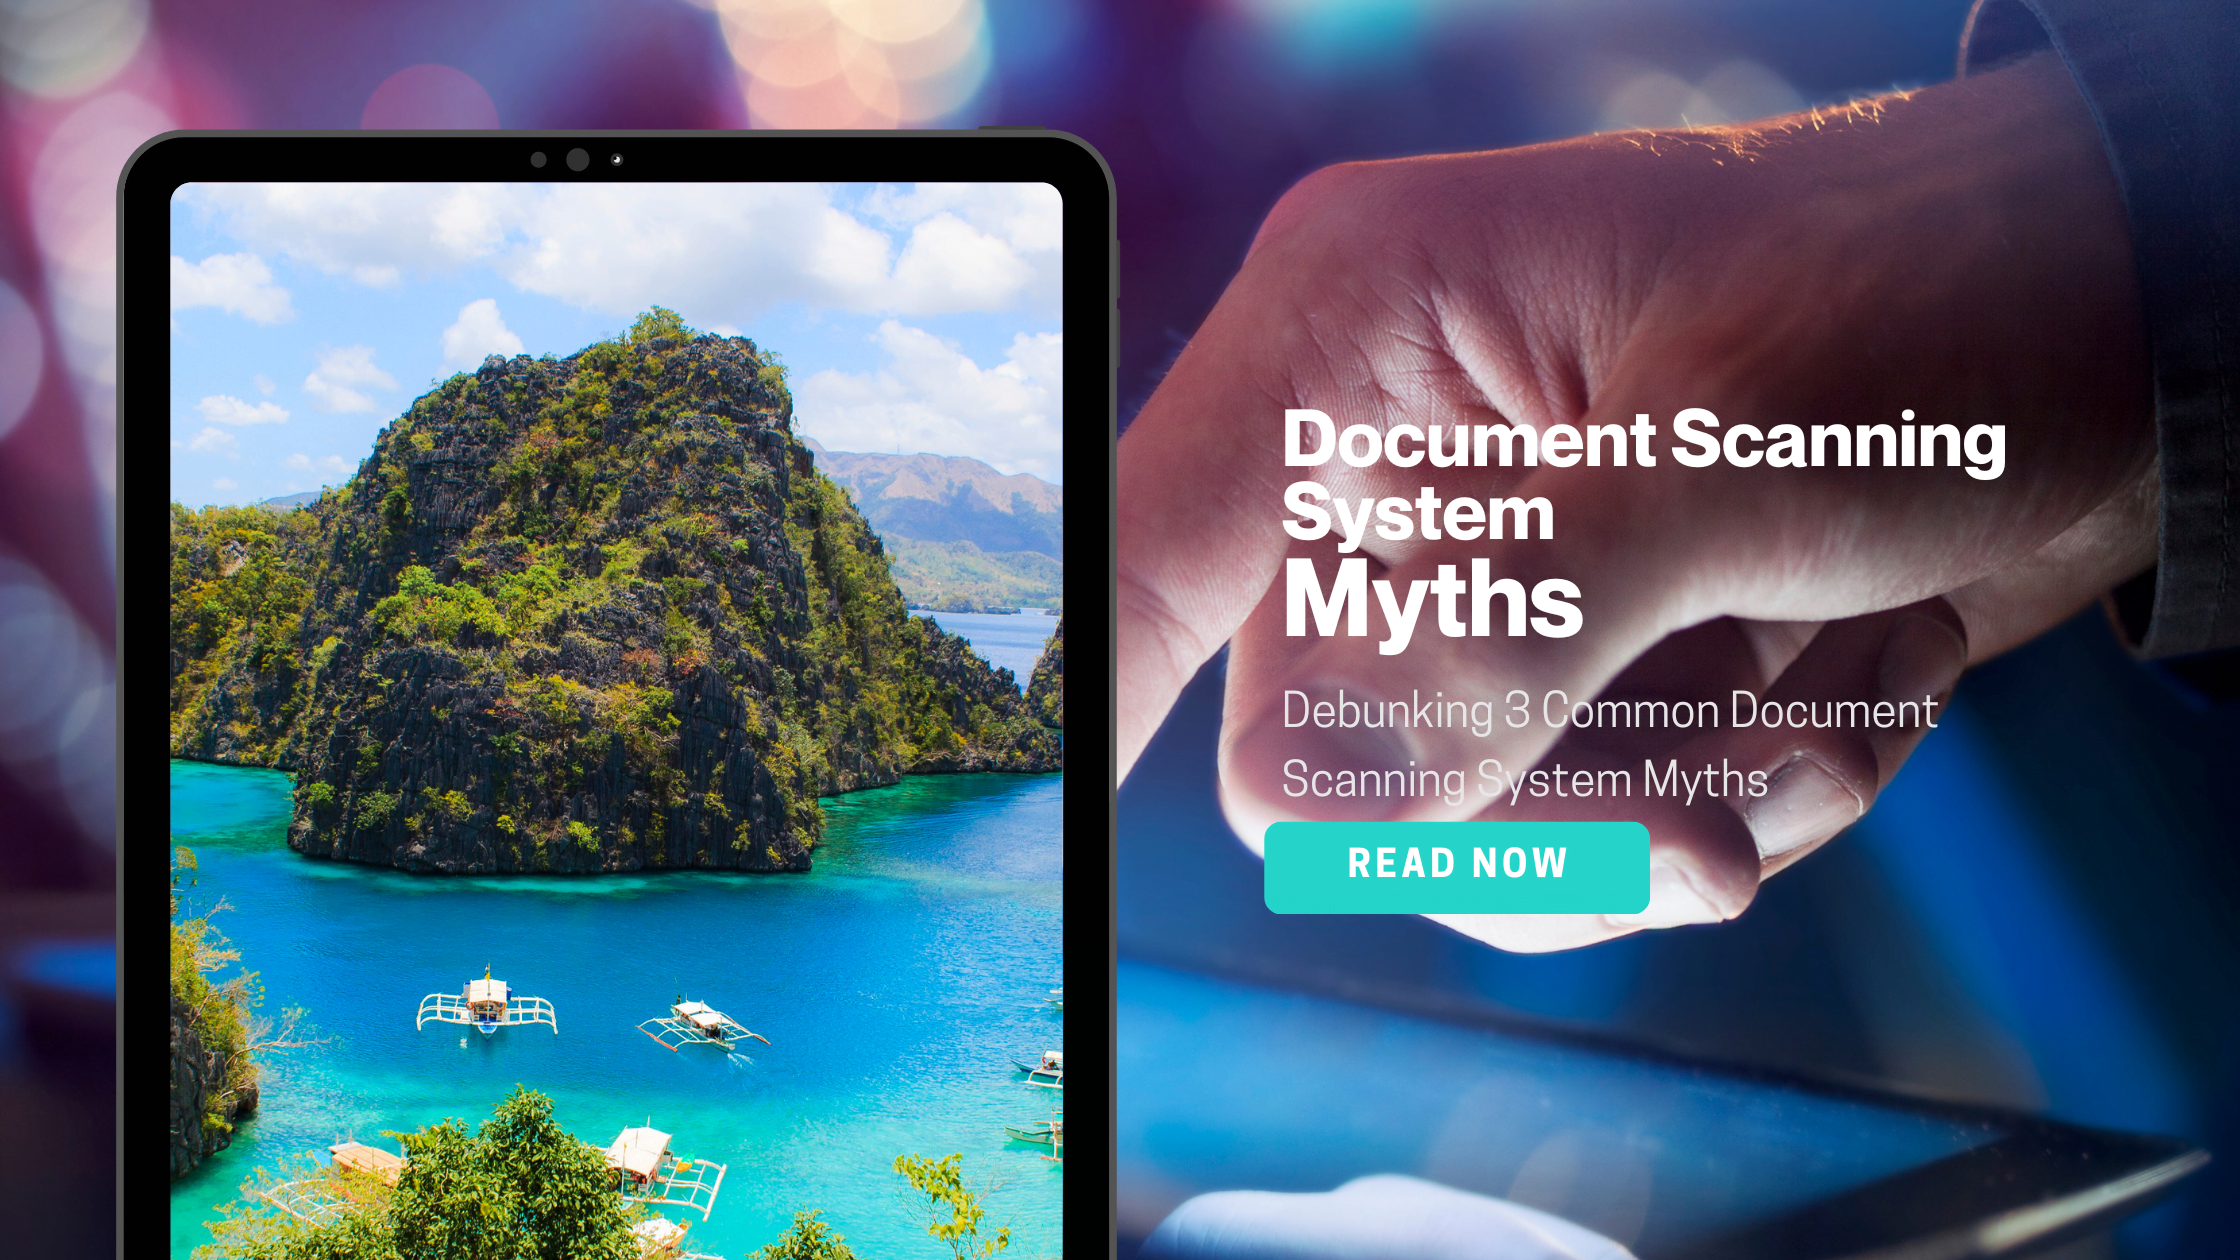 Debunking 3 Common Document Scanning System Myths